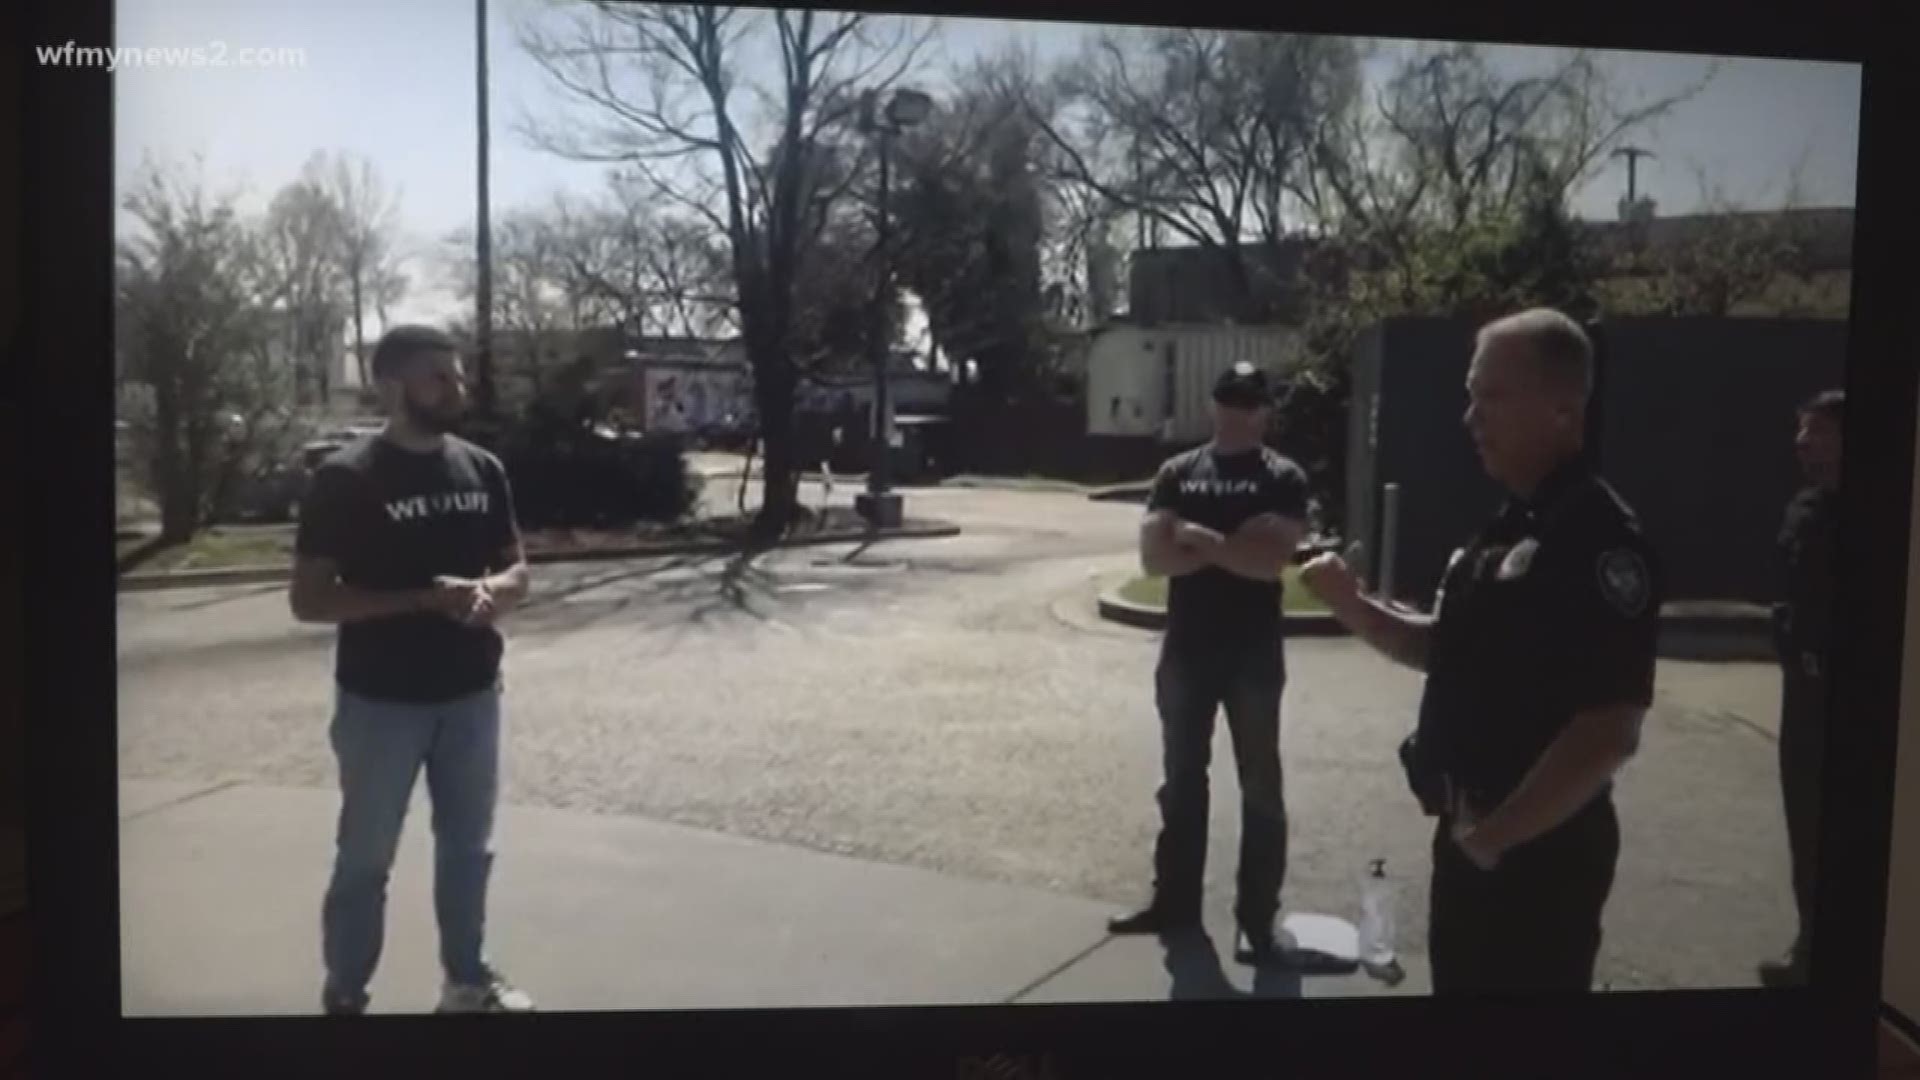 The men were protesting at an abortion center when police told them to leave.